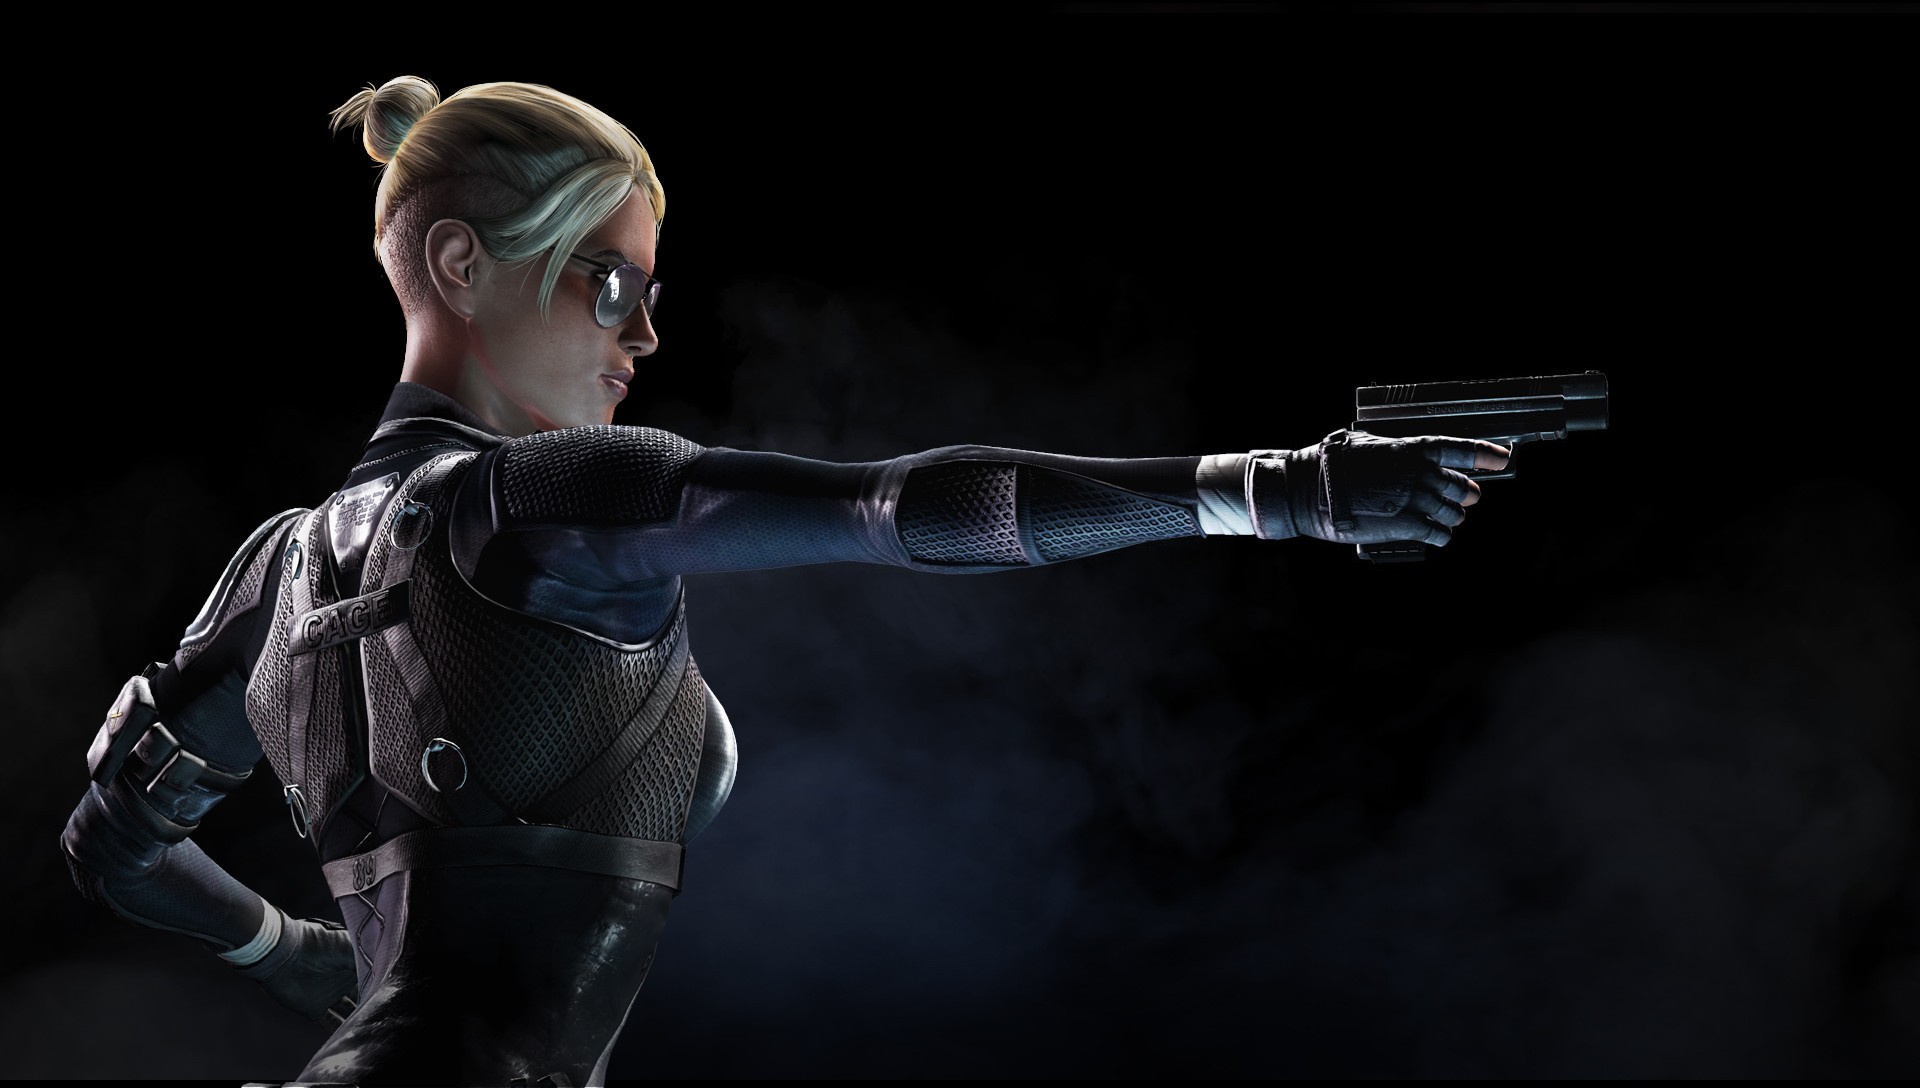 General 1920x1088 Mortal Kombat X girls with guns video game warriors video games video game art video game girls aiming Cassie Cage (Mortal Kombat) gun weapon sunglasses women with shades video game characters